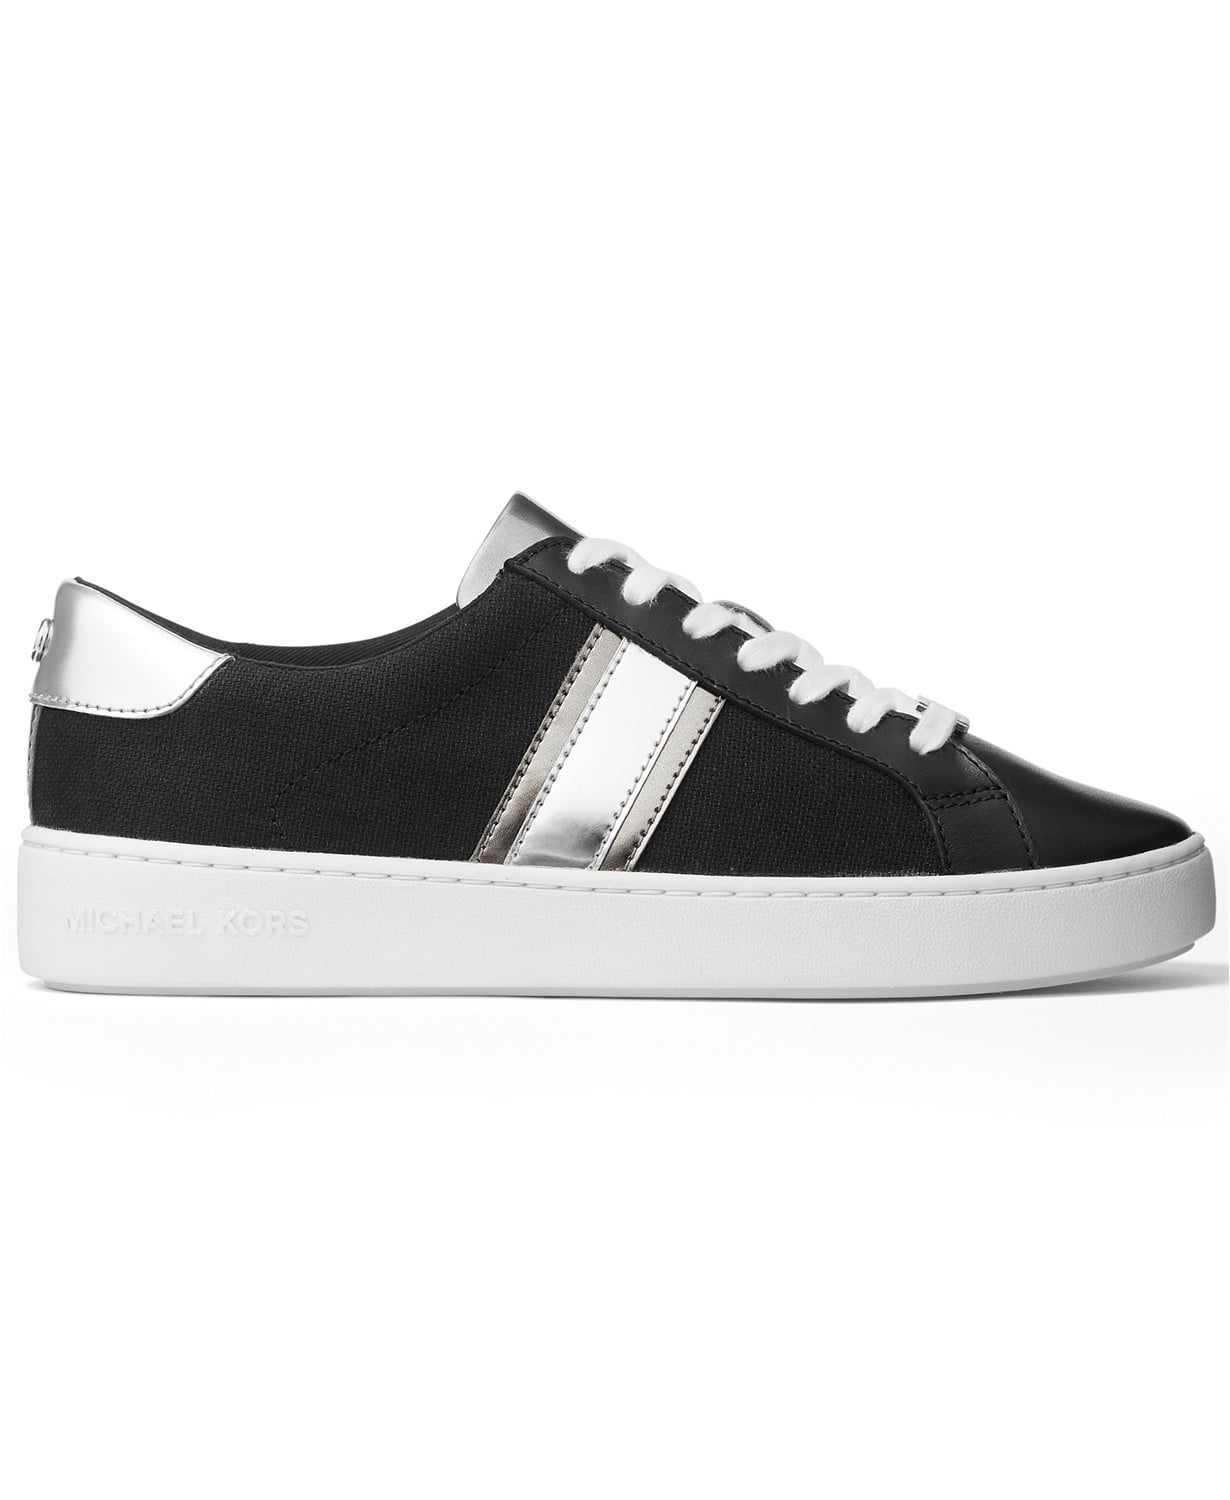 www.couturepoint.com-michael-michael-kors-black-canvas-leather-irving-side-striped-lace-up-sneakers